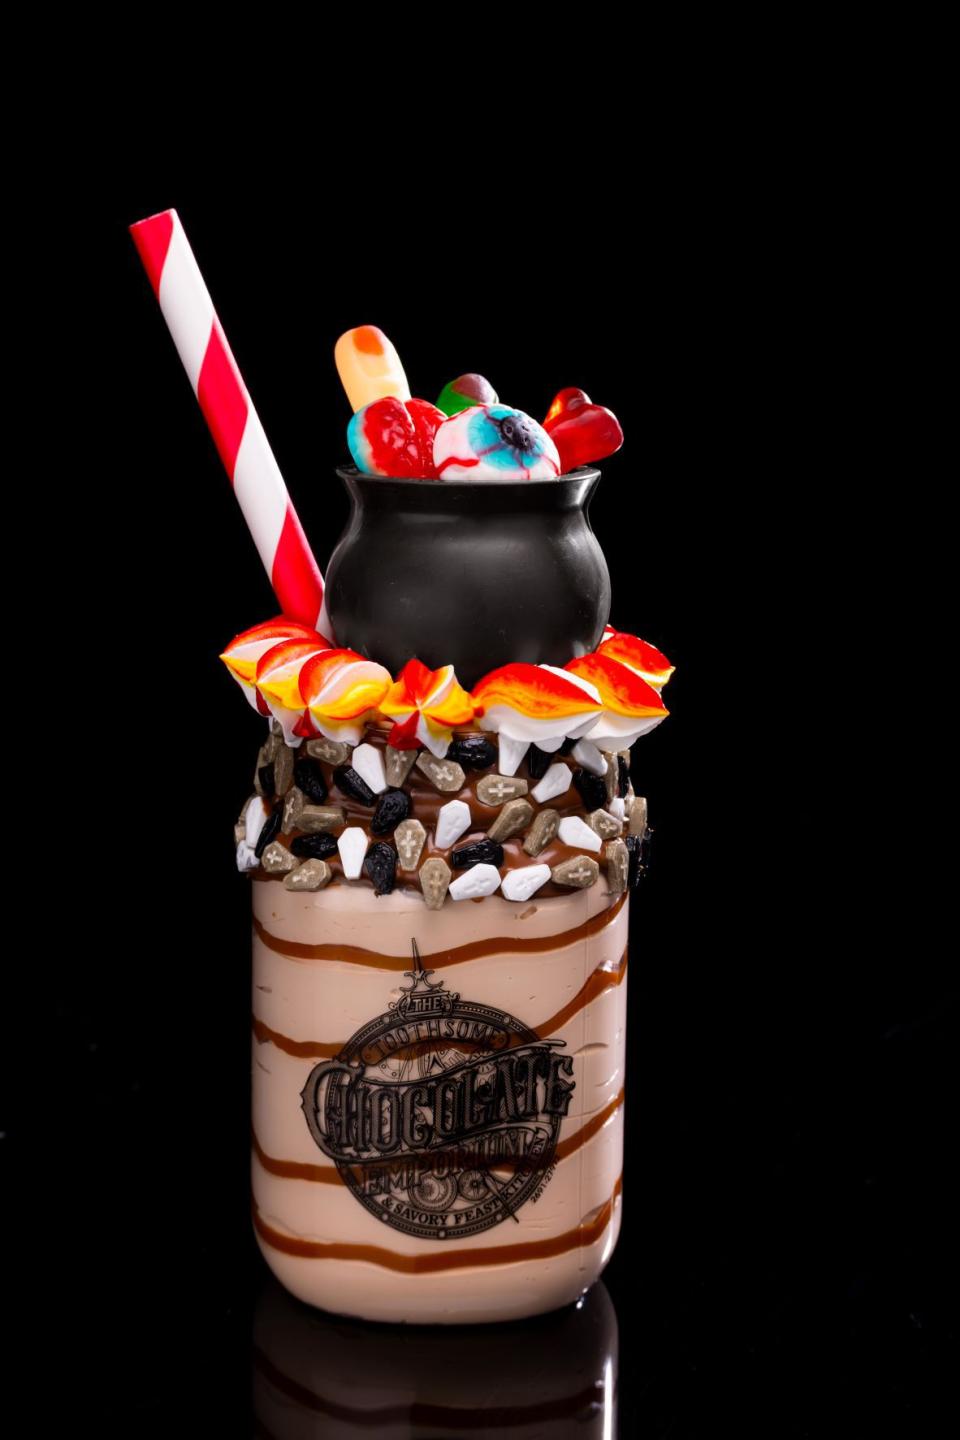 At Universal CityWalk, guests can indulge in the new Black Magic Milkshake (gluten-free) at The Toothsome Chocolate Emporium & Savory Feast Kitchen, featuring pumpkin dulce de leche ice cream with a hazelnut-and-tombstone-sprinkled rim – topped with a cauldron filled with gummy “severed body parts” over whipped flames.